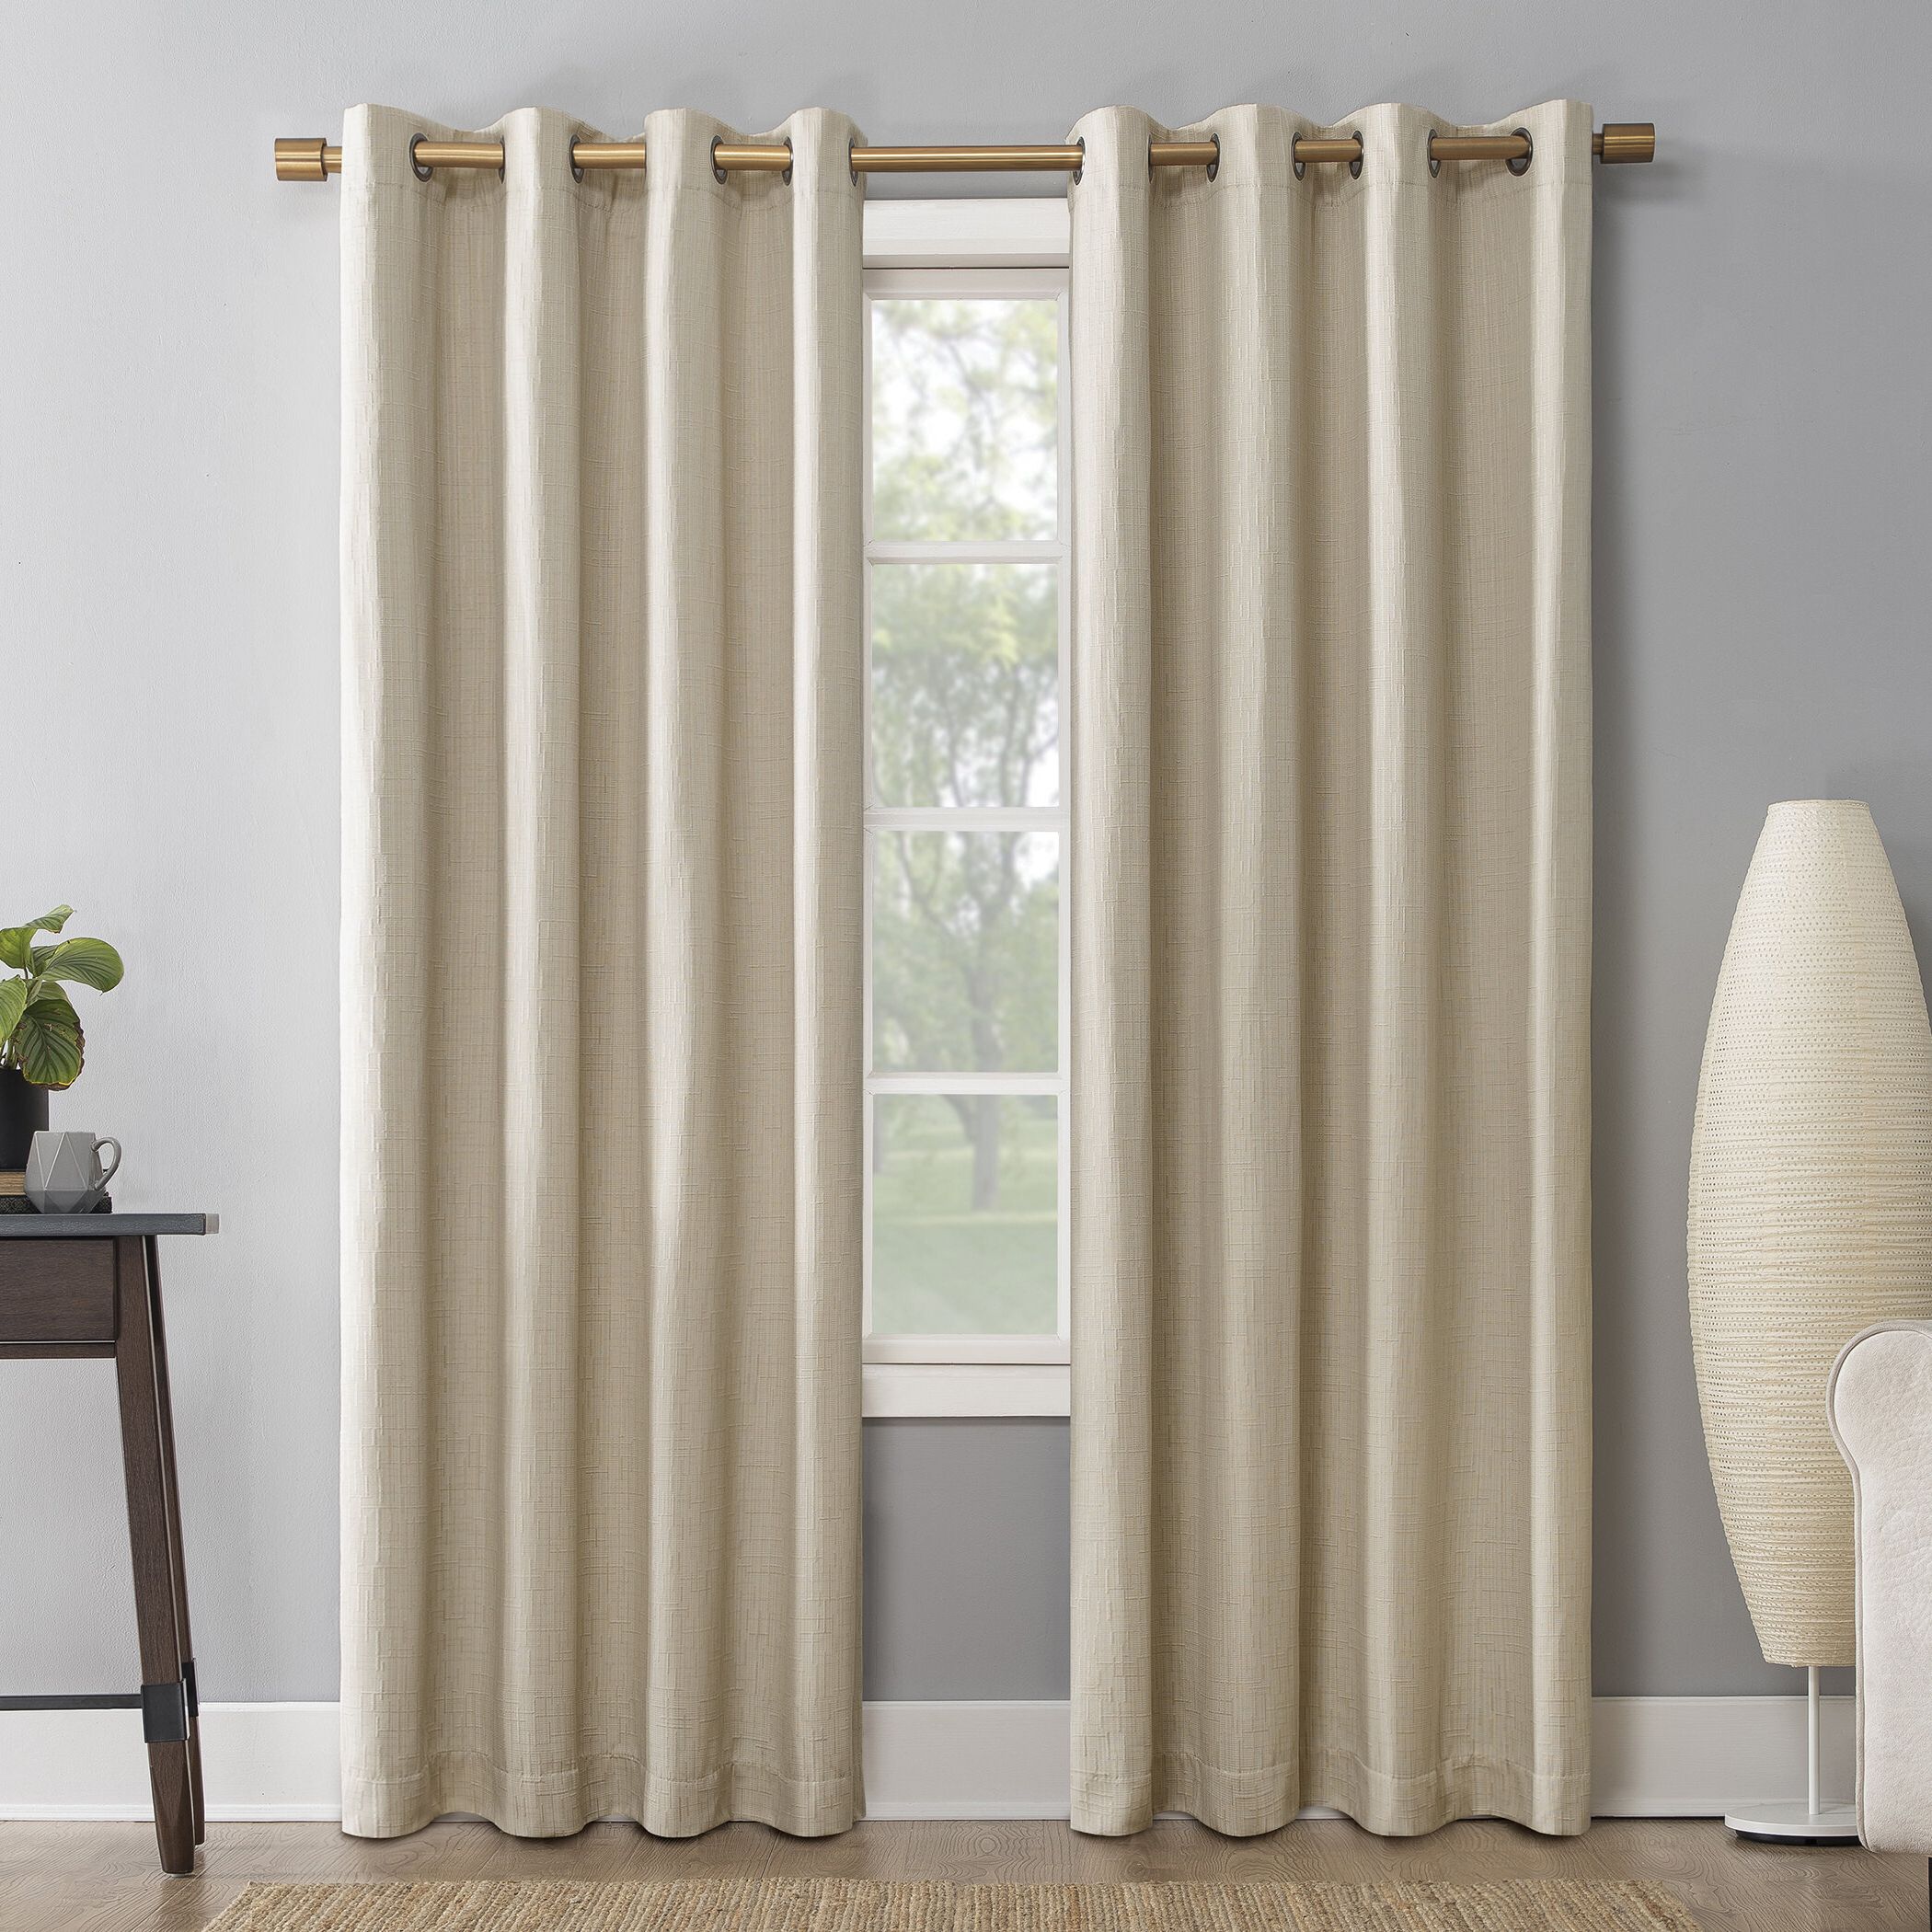 Evelina Faux Dupioni Silk Extreme Blackout Back Tab Curtain Panels With Regard To Famous Sun Zero Gavlin Geometric Max Blackout Thermal Grommet (View 16 of 20)